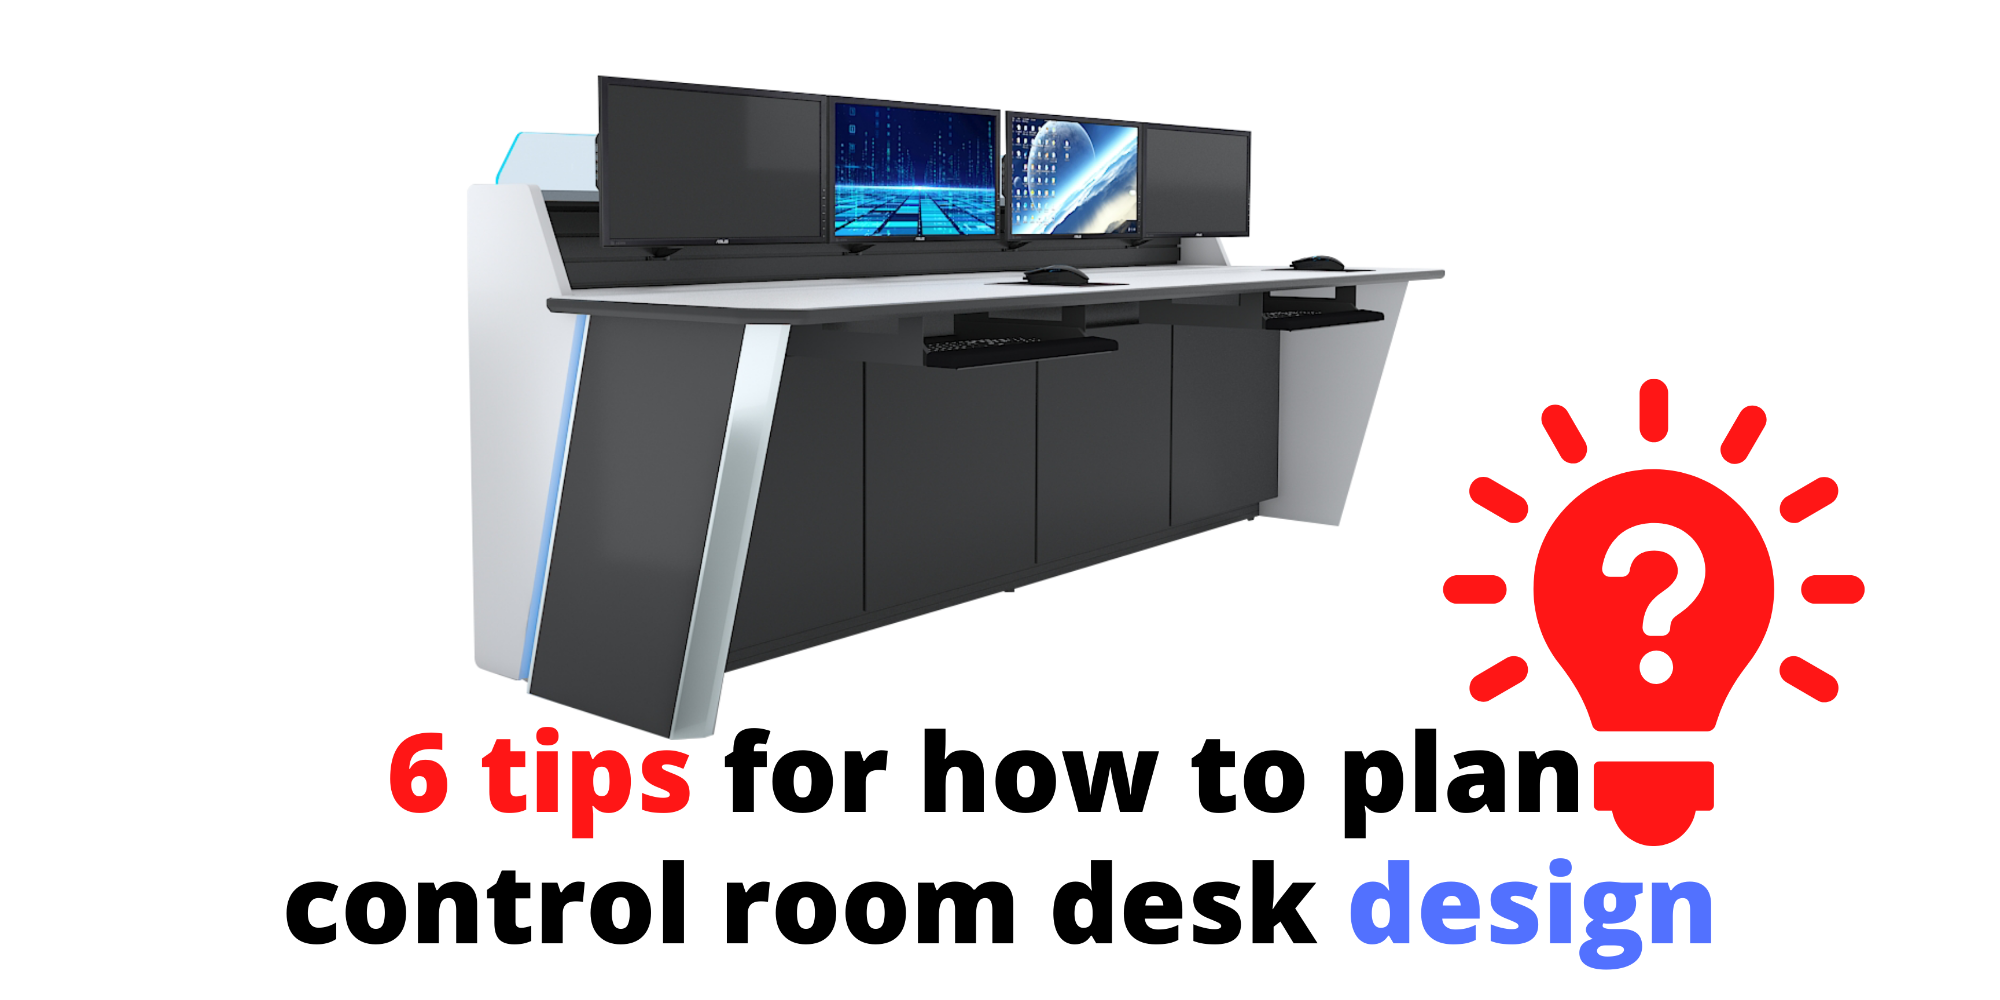 6 tips for how to plan your control room desk design